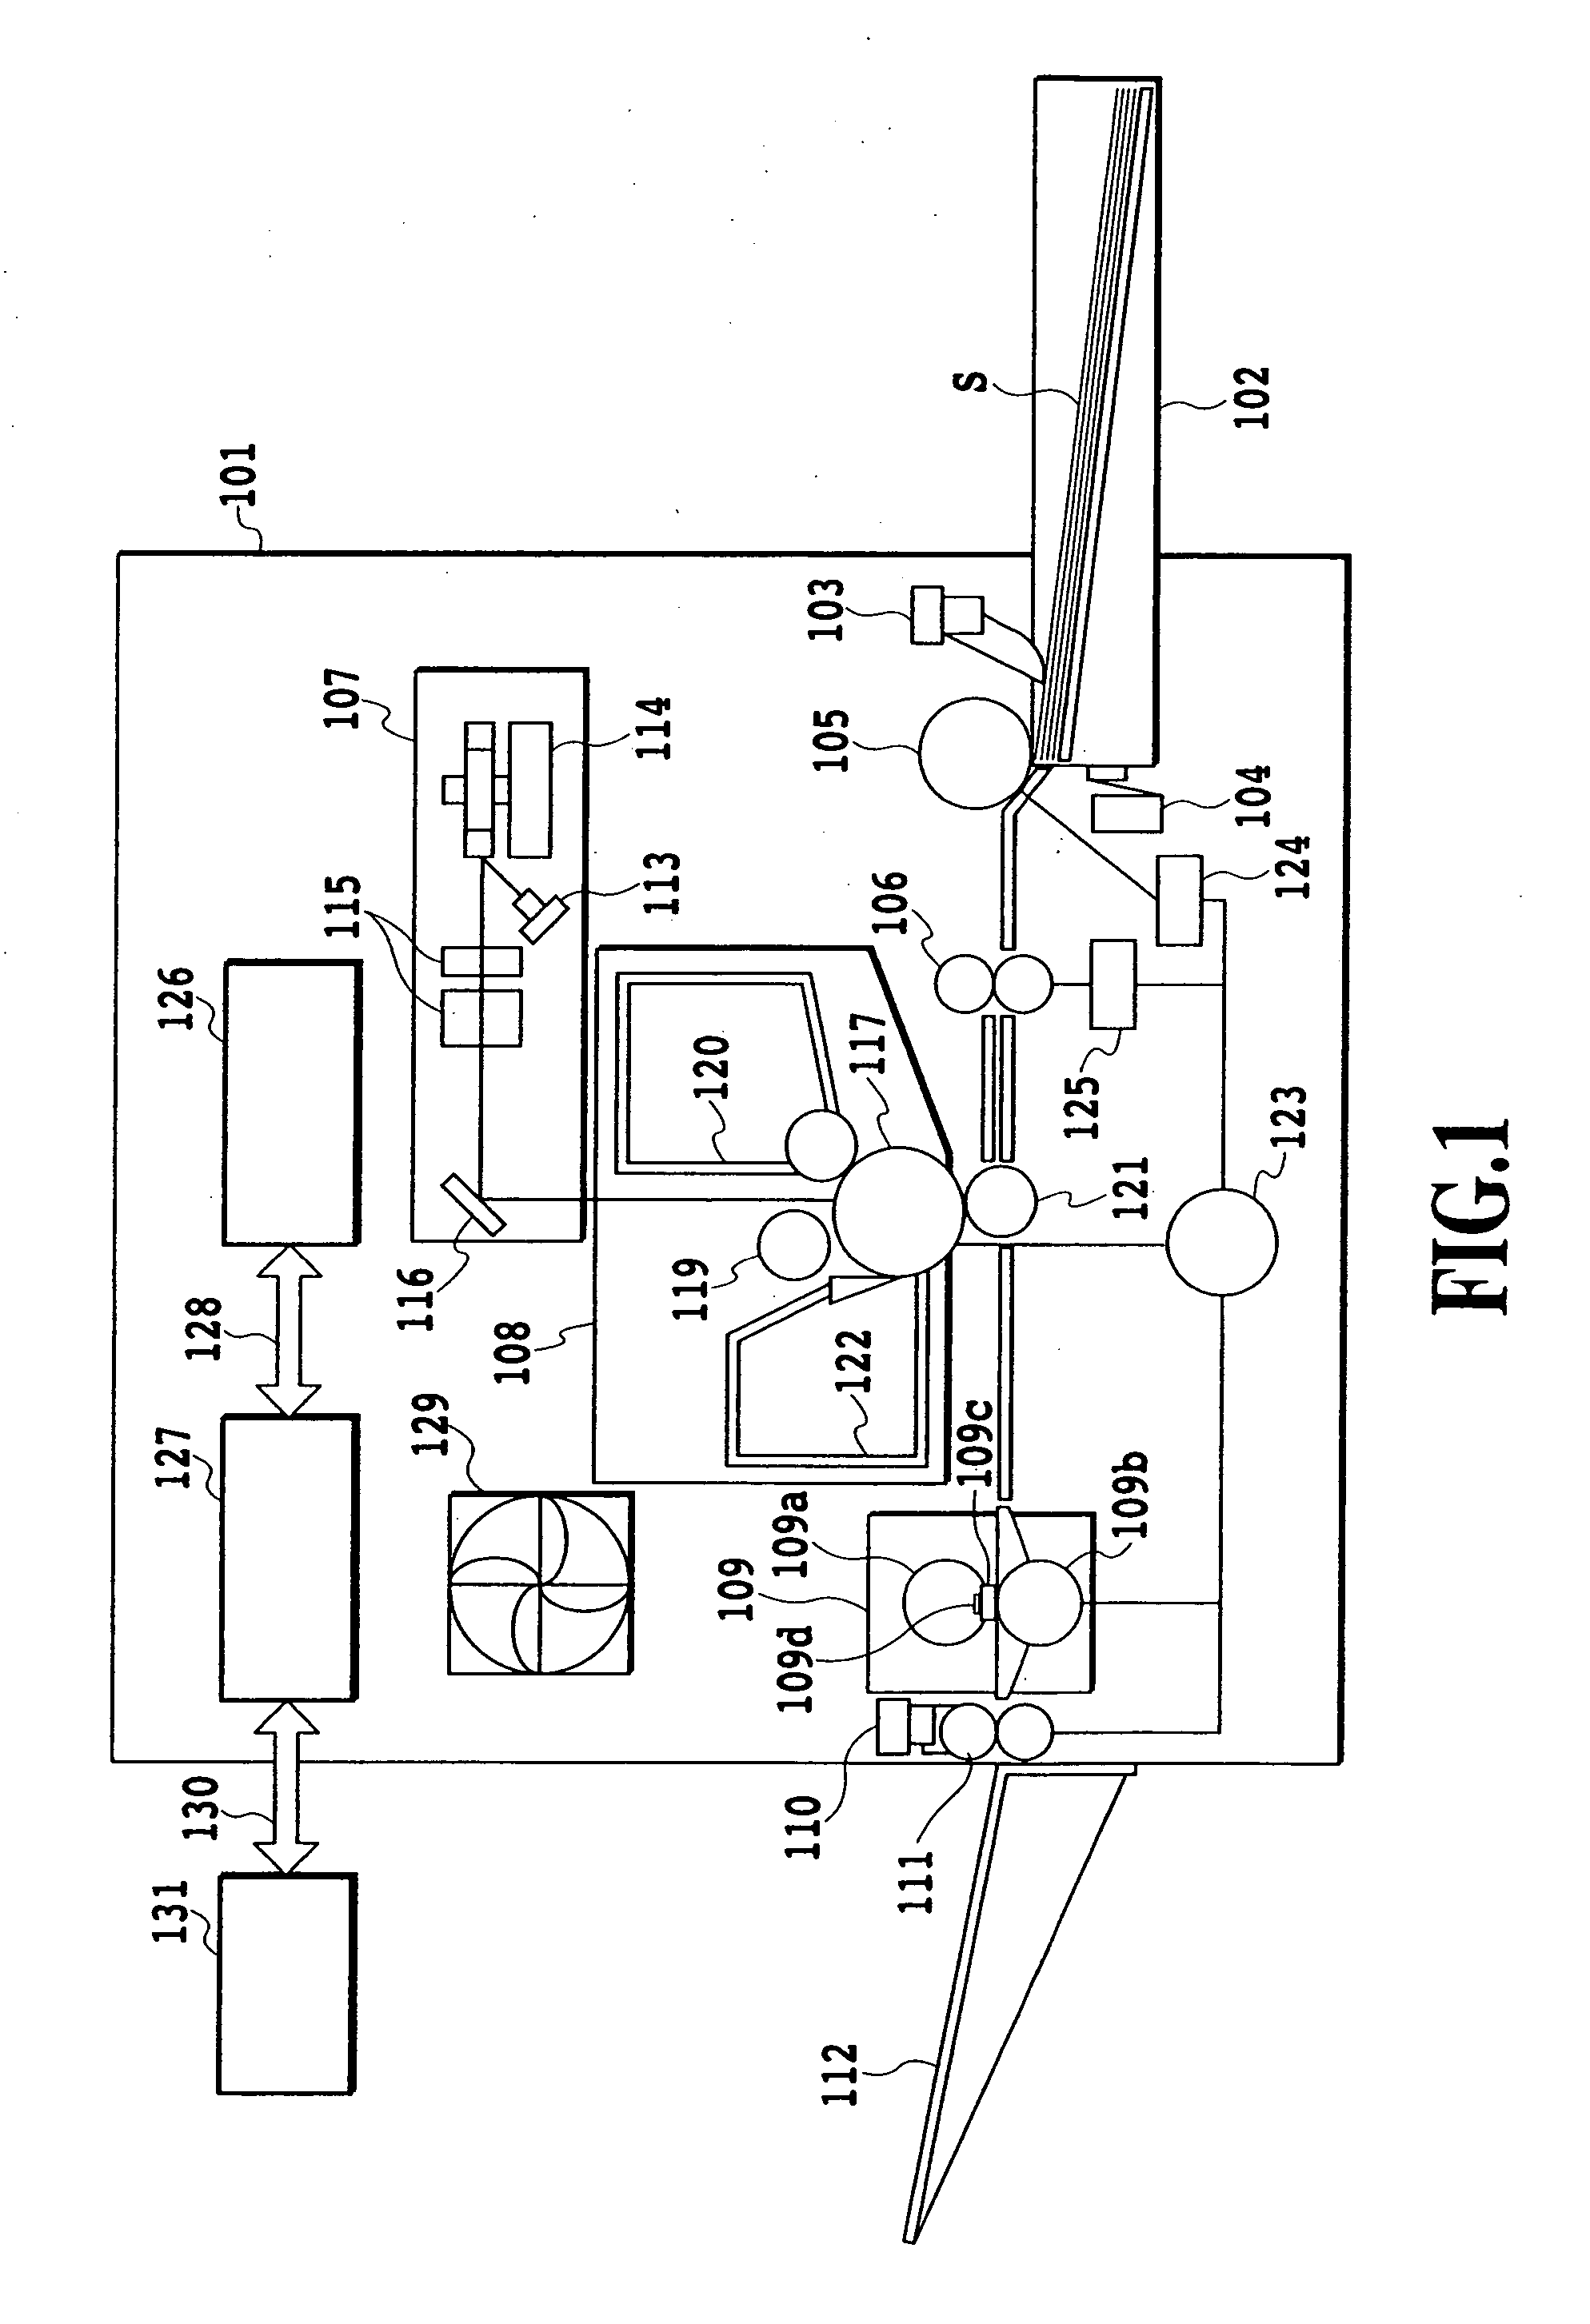 Image forming apparatus and electric-power control method